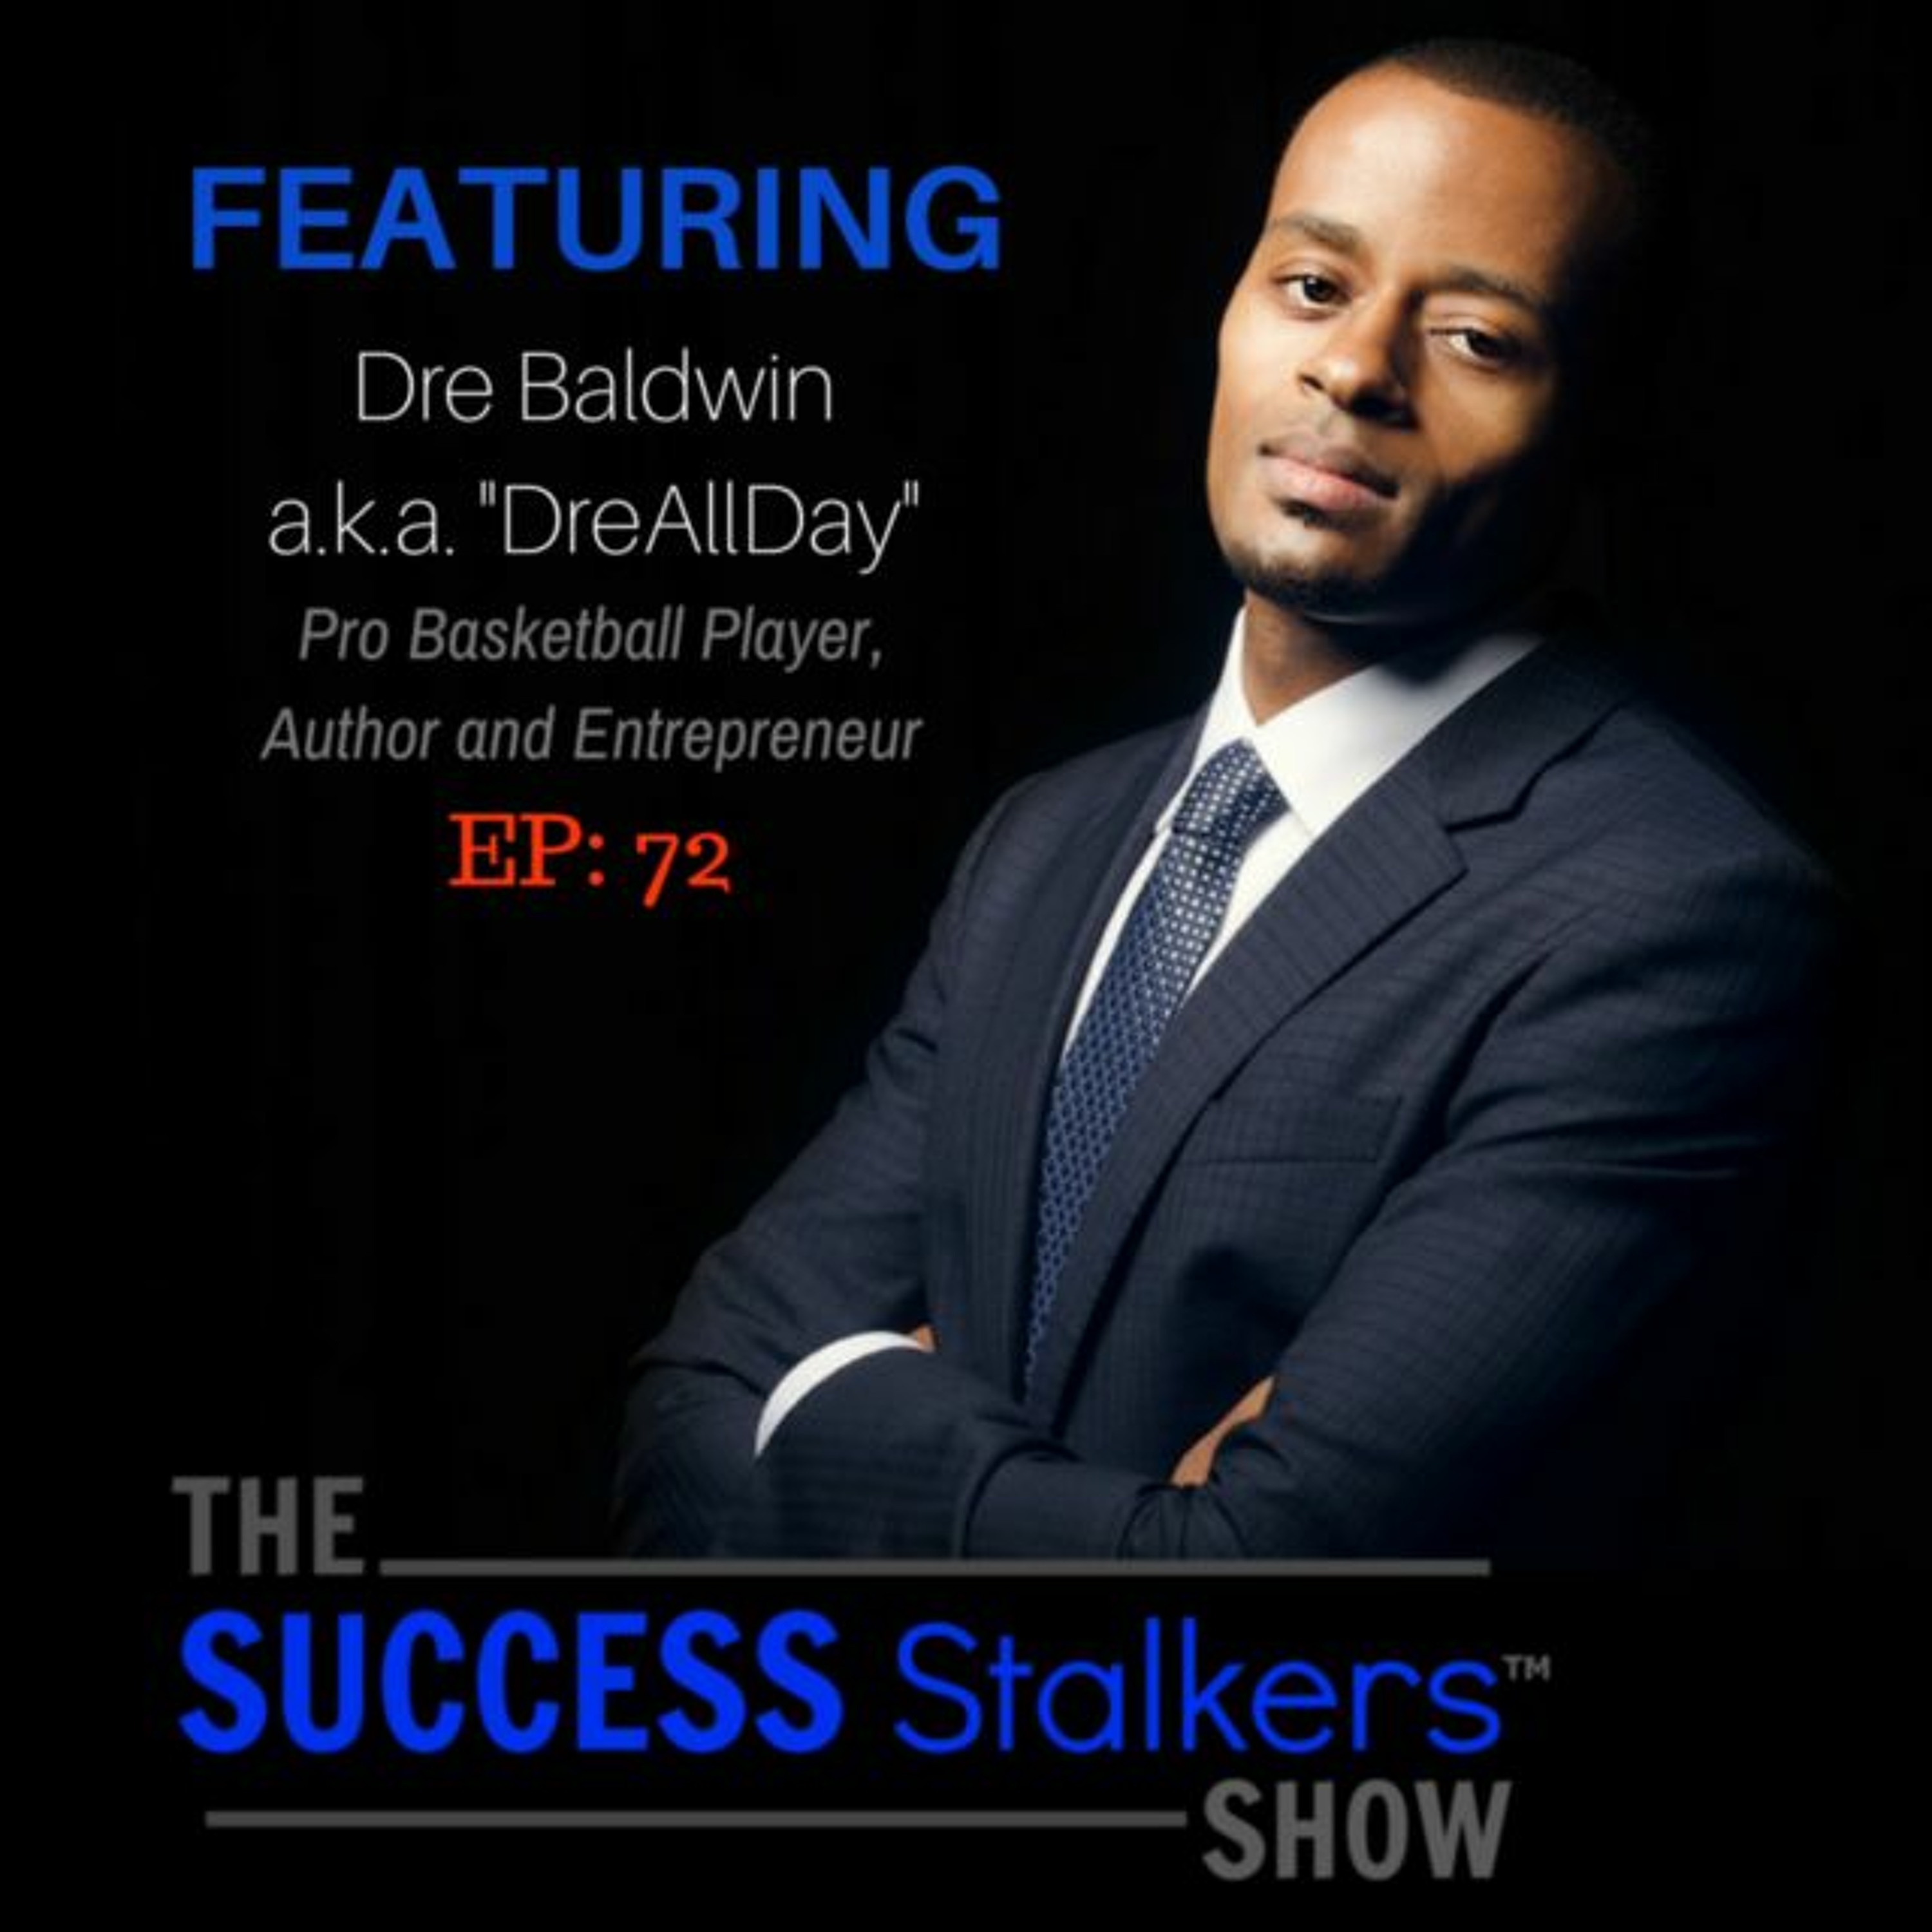 72: Pro Basketball Player Dre Baldwin Teaches How To Work On Your Game Image